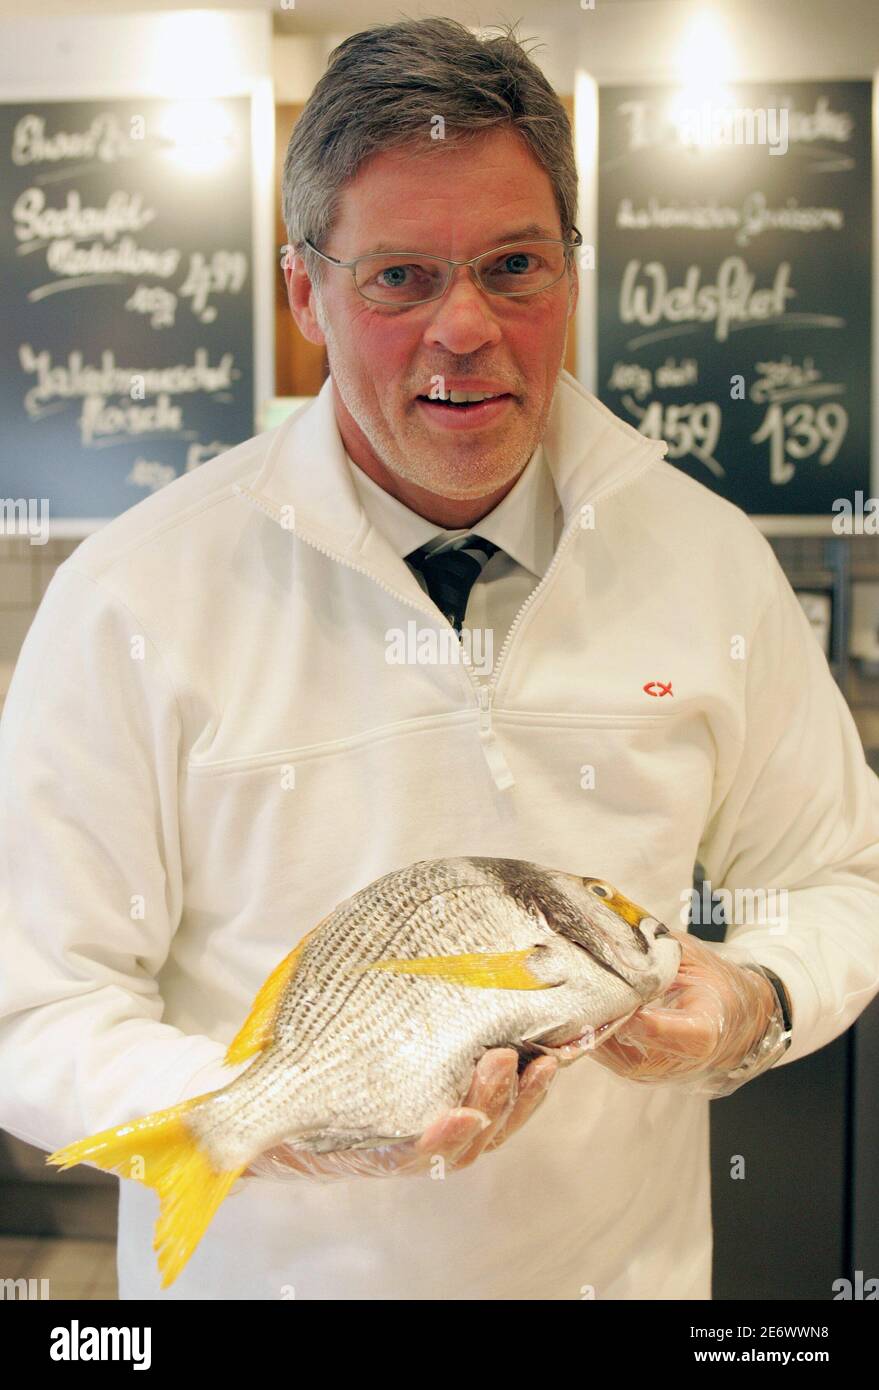 'Nordsee'-fast food chain owner Heiner Kamps poses for photographers with a fish after a news conference in Vienna February 23, 2006. Stock Photo